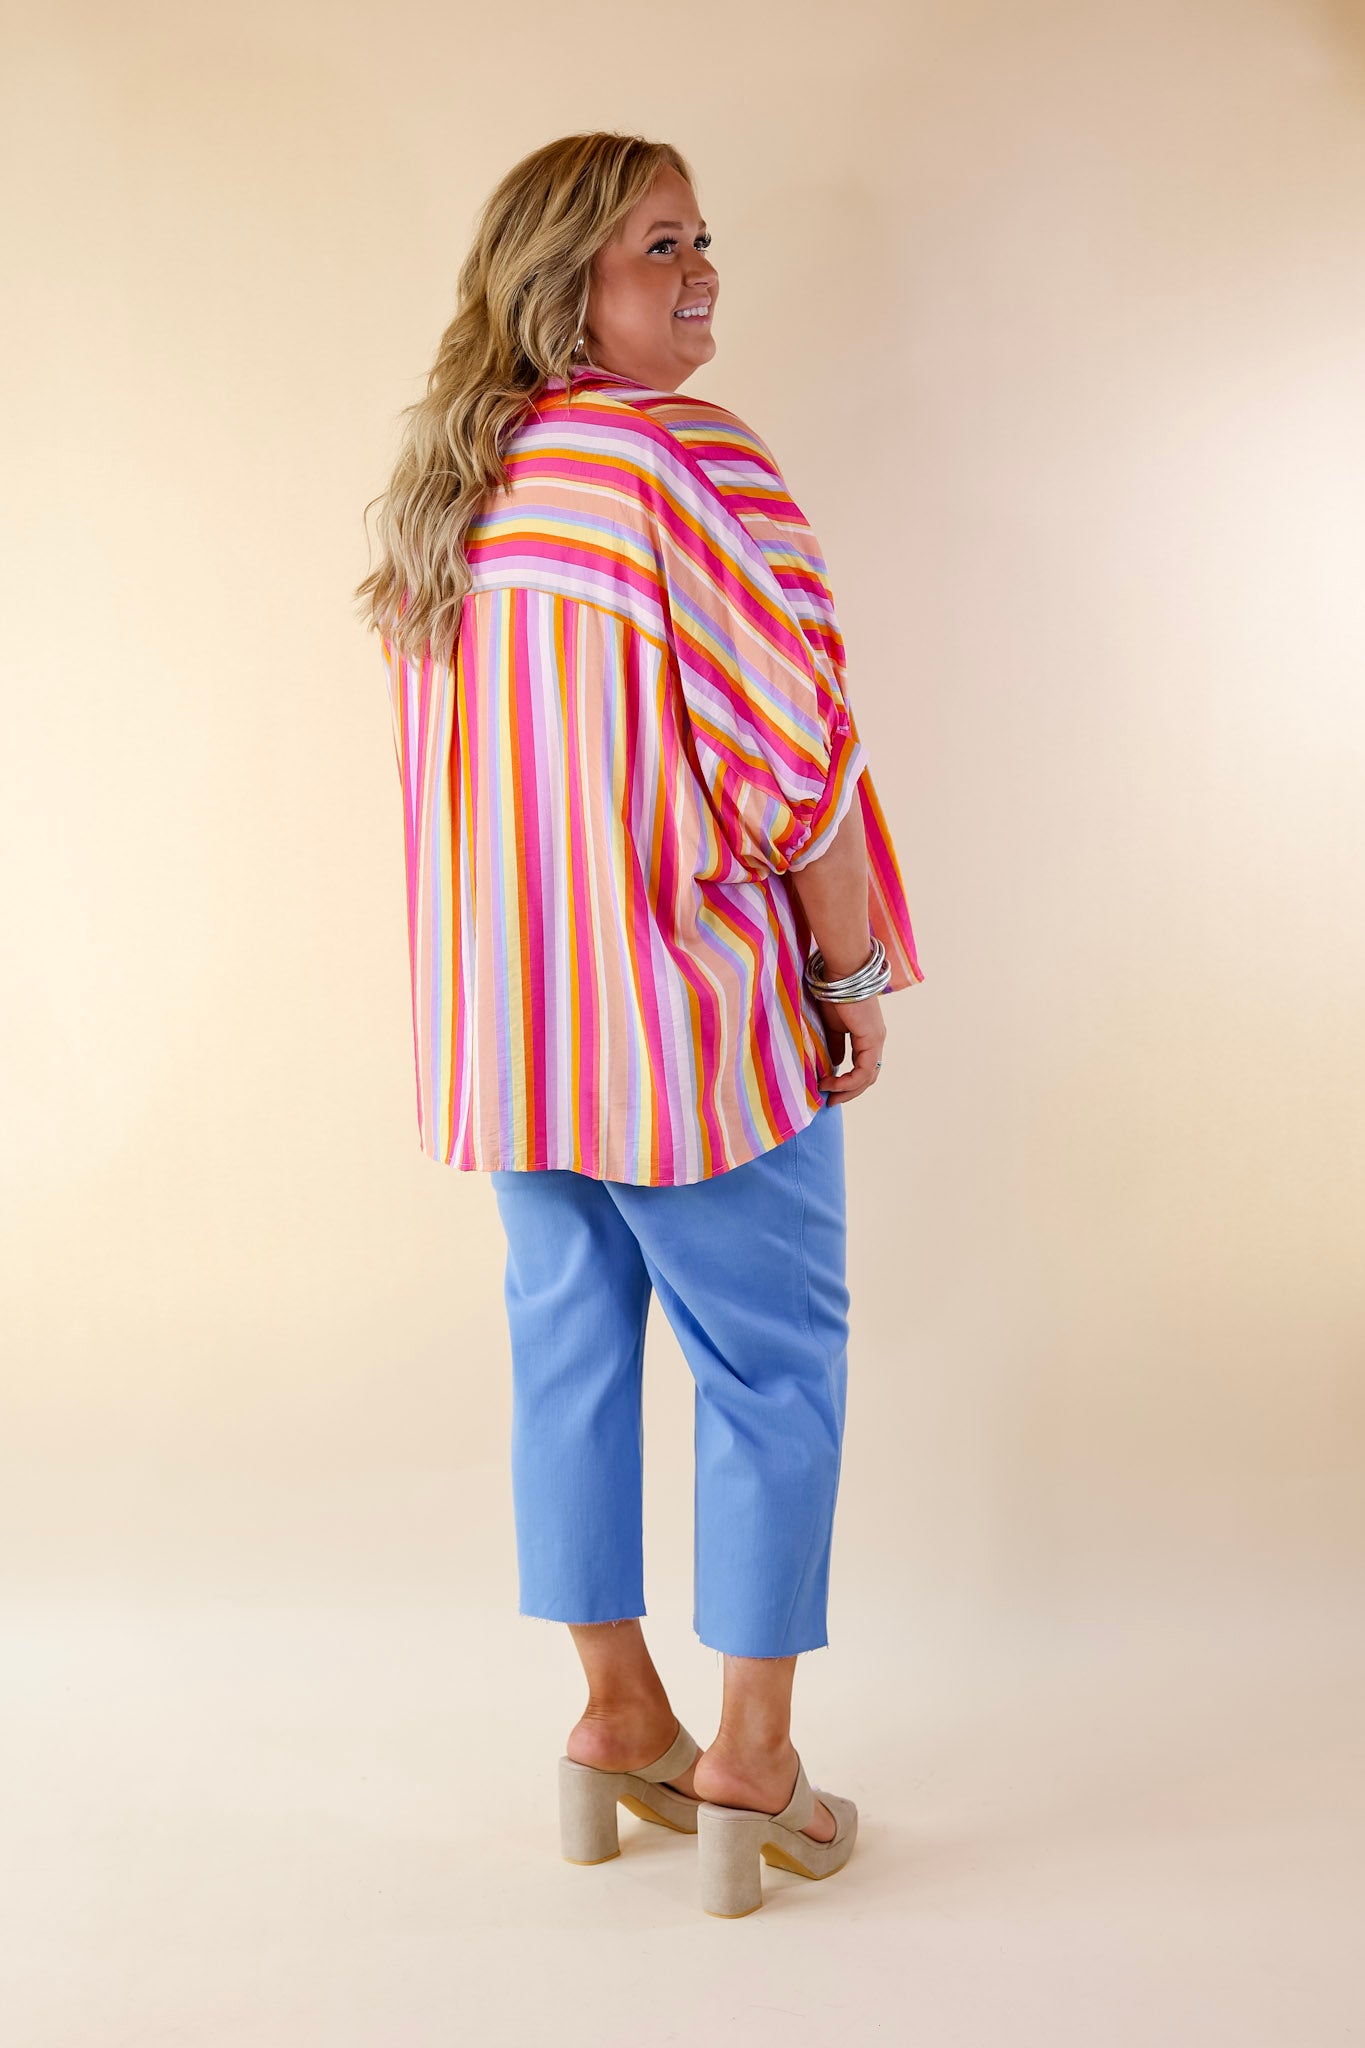 Bold Bliss Multi Color Striped Top with Collar - Giddy Up Glamour Boutique